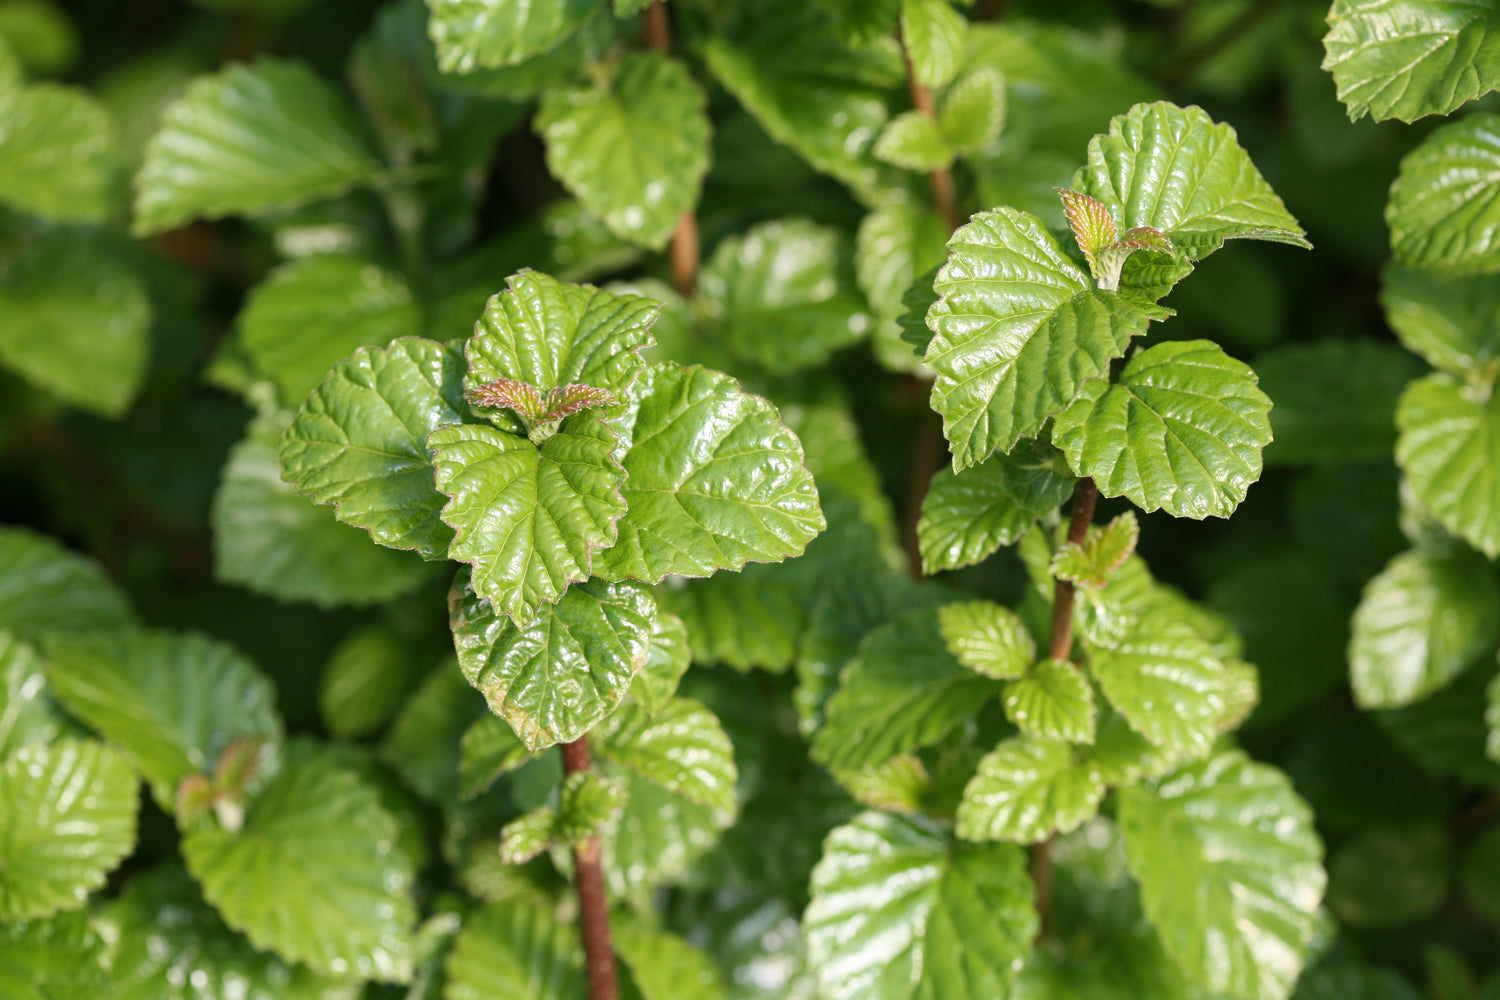 A close view of the glossy foliage of All That Glows viburnum